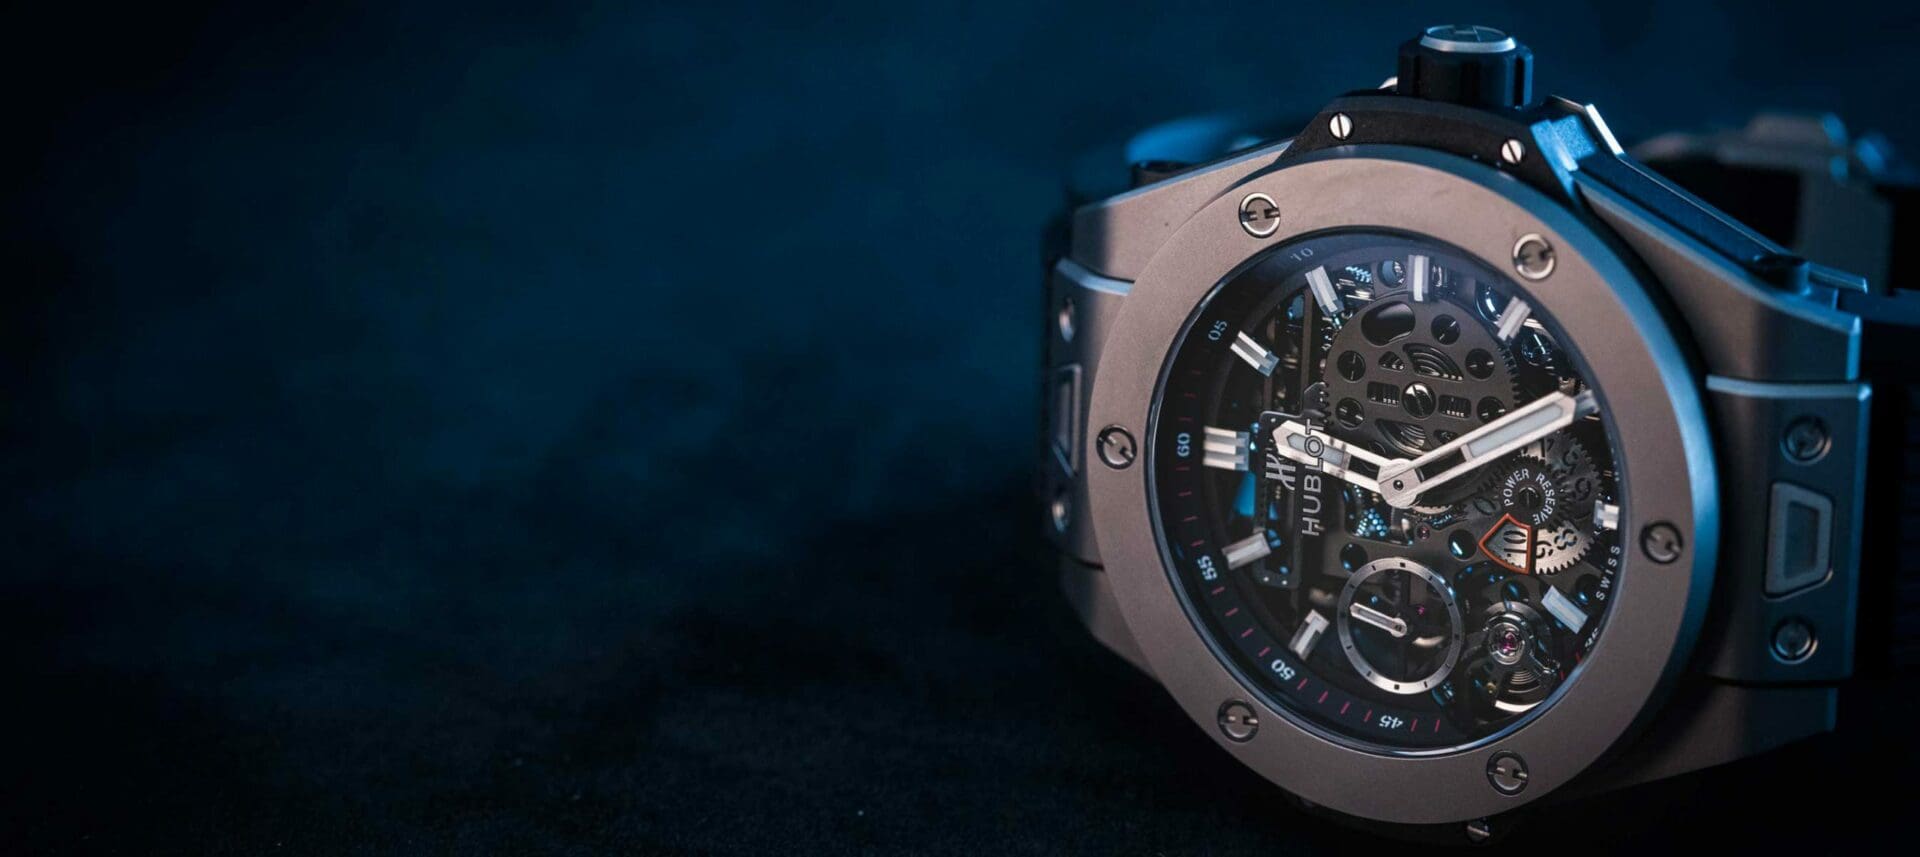 HANDS-ON: The Hublot Big Bang MECA-10, for when one power reserve indicator isn’t enough